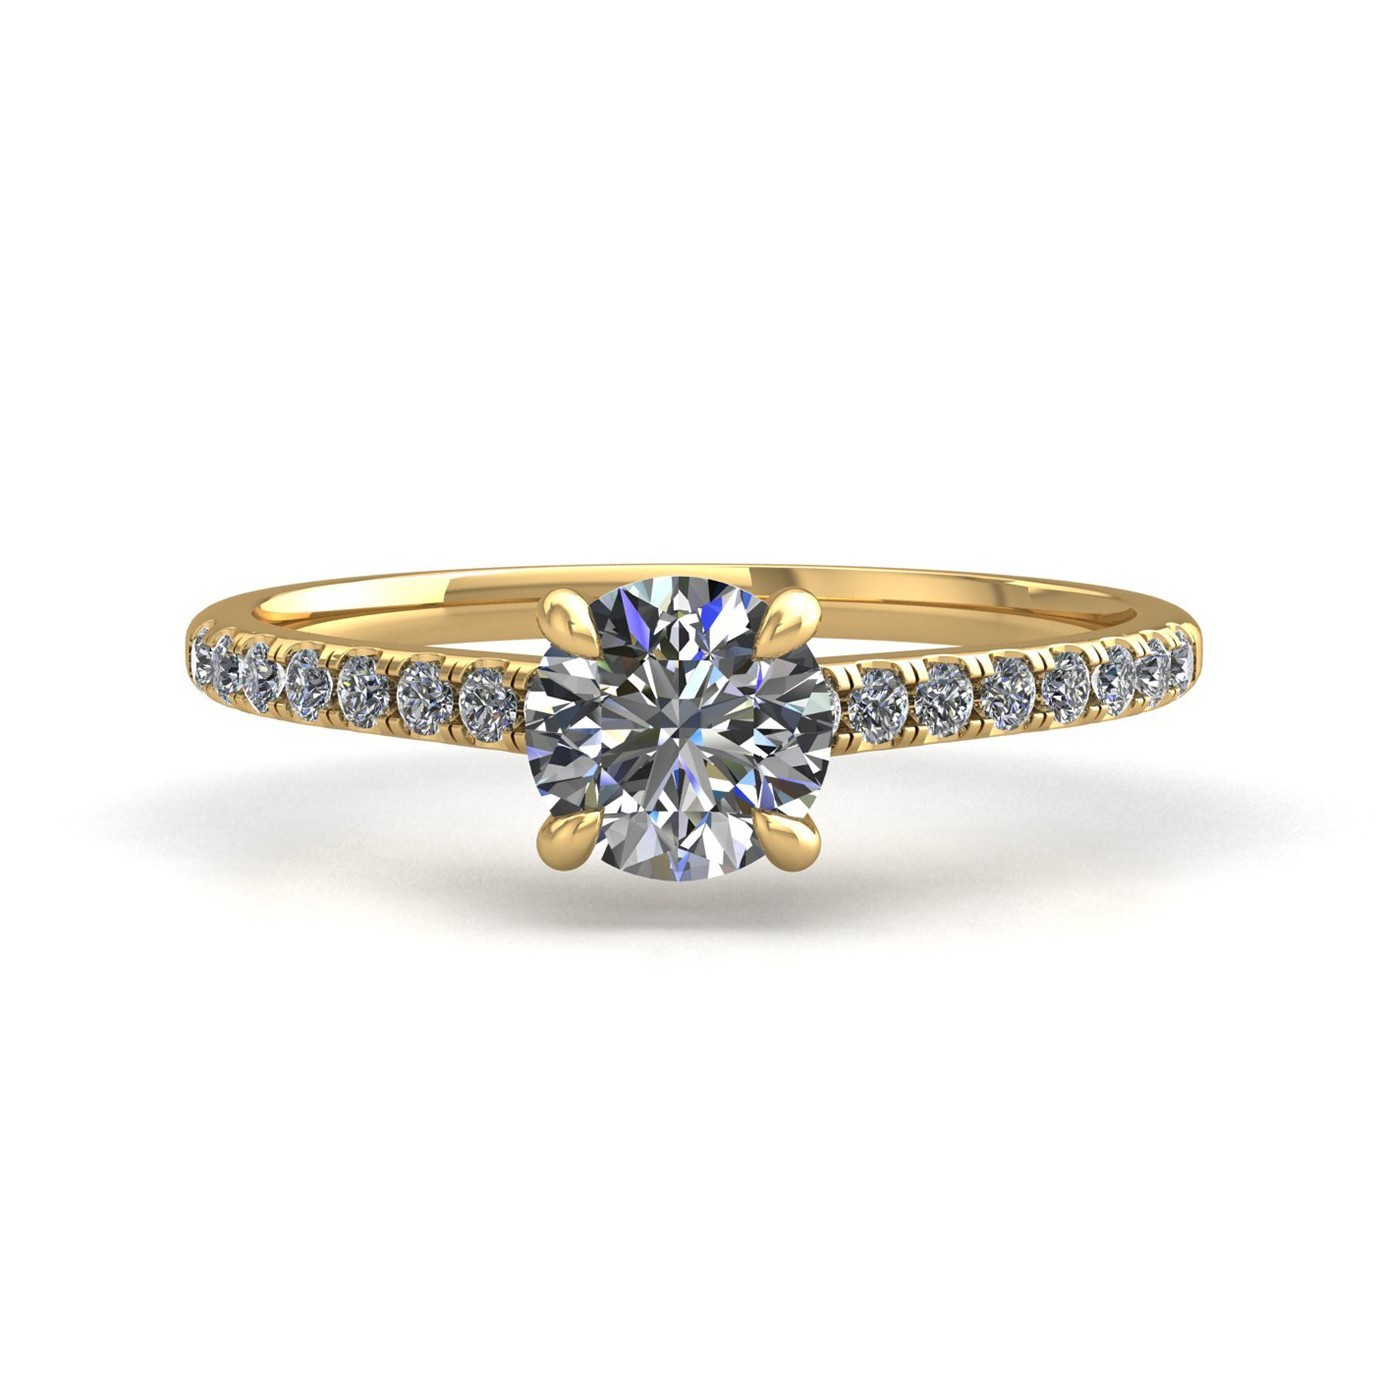 18k yellow gold 2.5ct 4 prongs round cut diamond engagement ring with whisper thin pavÉ set band Photos & images